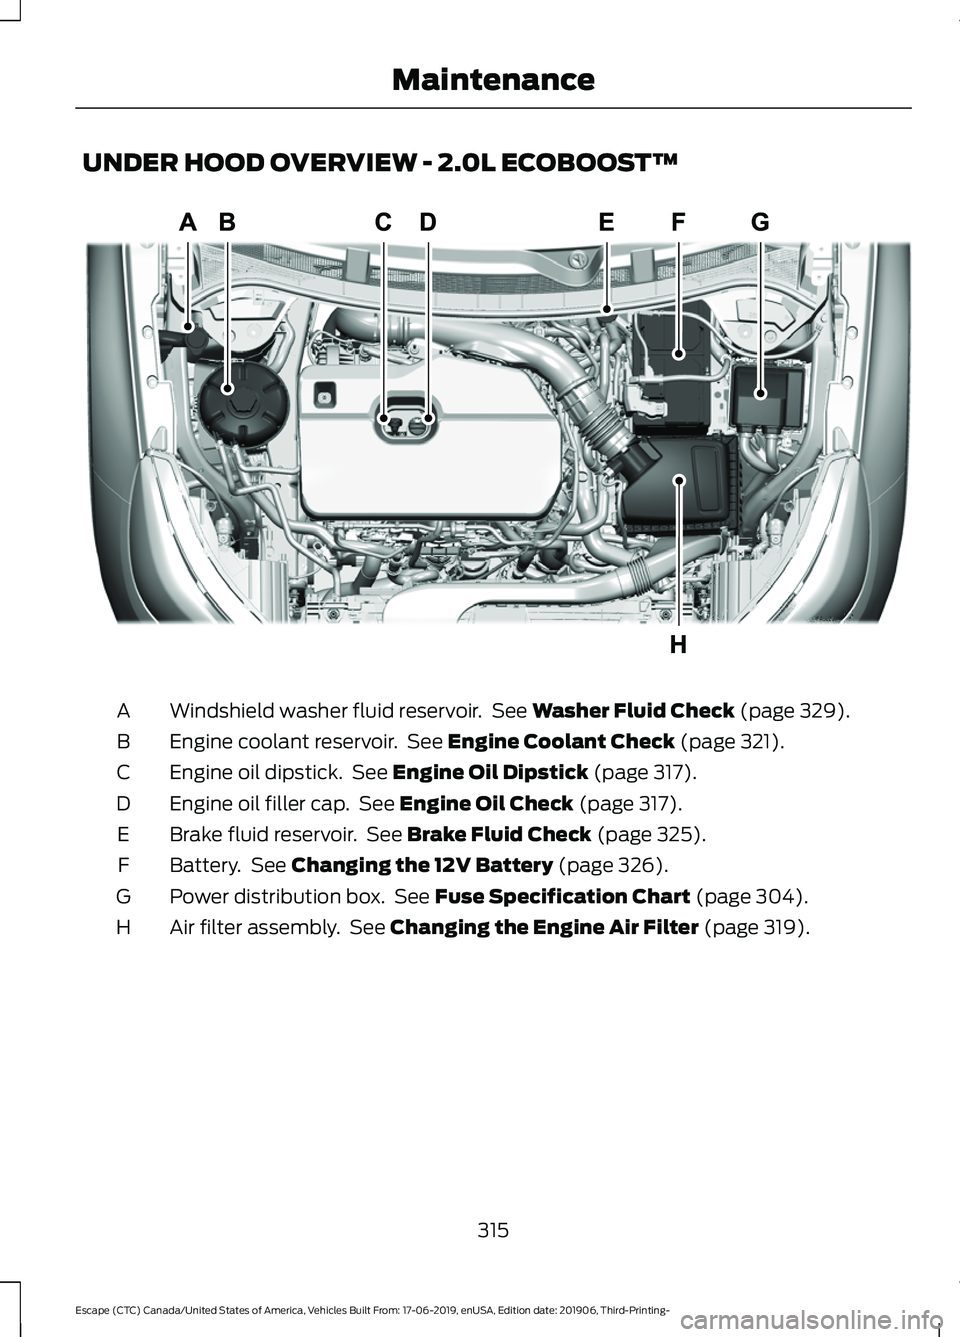 FORD ESCAPE 2020  Owners Manual UNDER HOOD OVERVIEW - 2.0L ECOBOOST™
Windshield washer fluid reservoir.  See Washer Fluid Check (page 329).
A
Engine coolant reservoir.  See 
Engine Coolant Check (page 321).
B
Engine oil dipstick. 